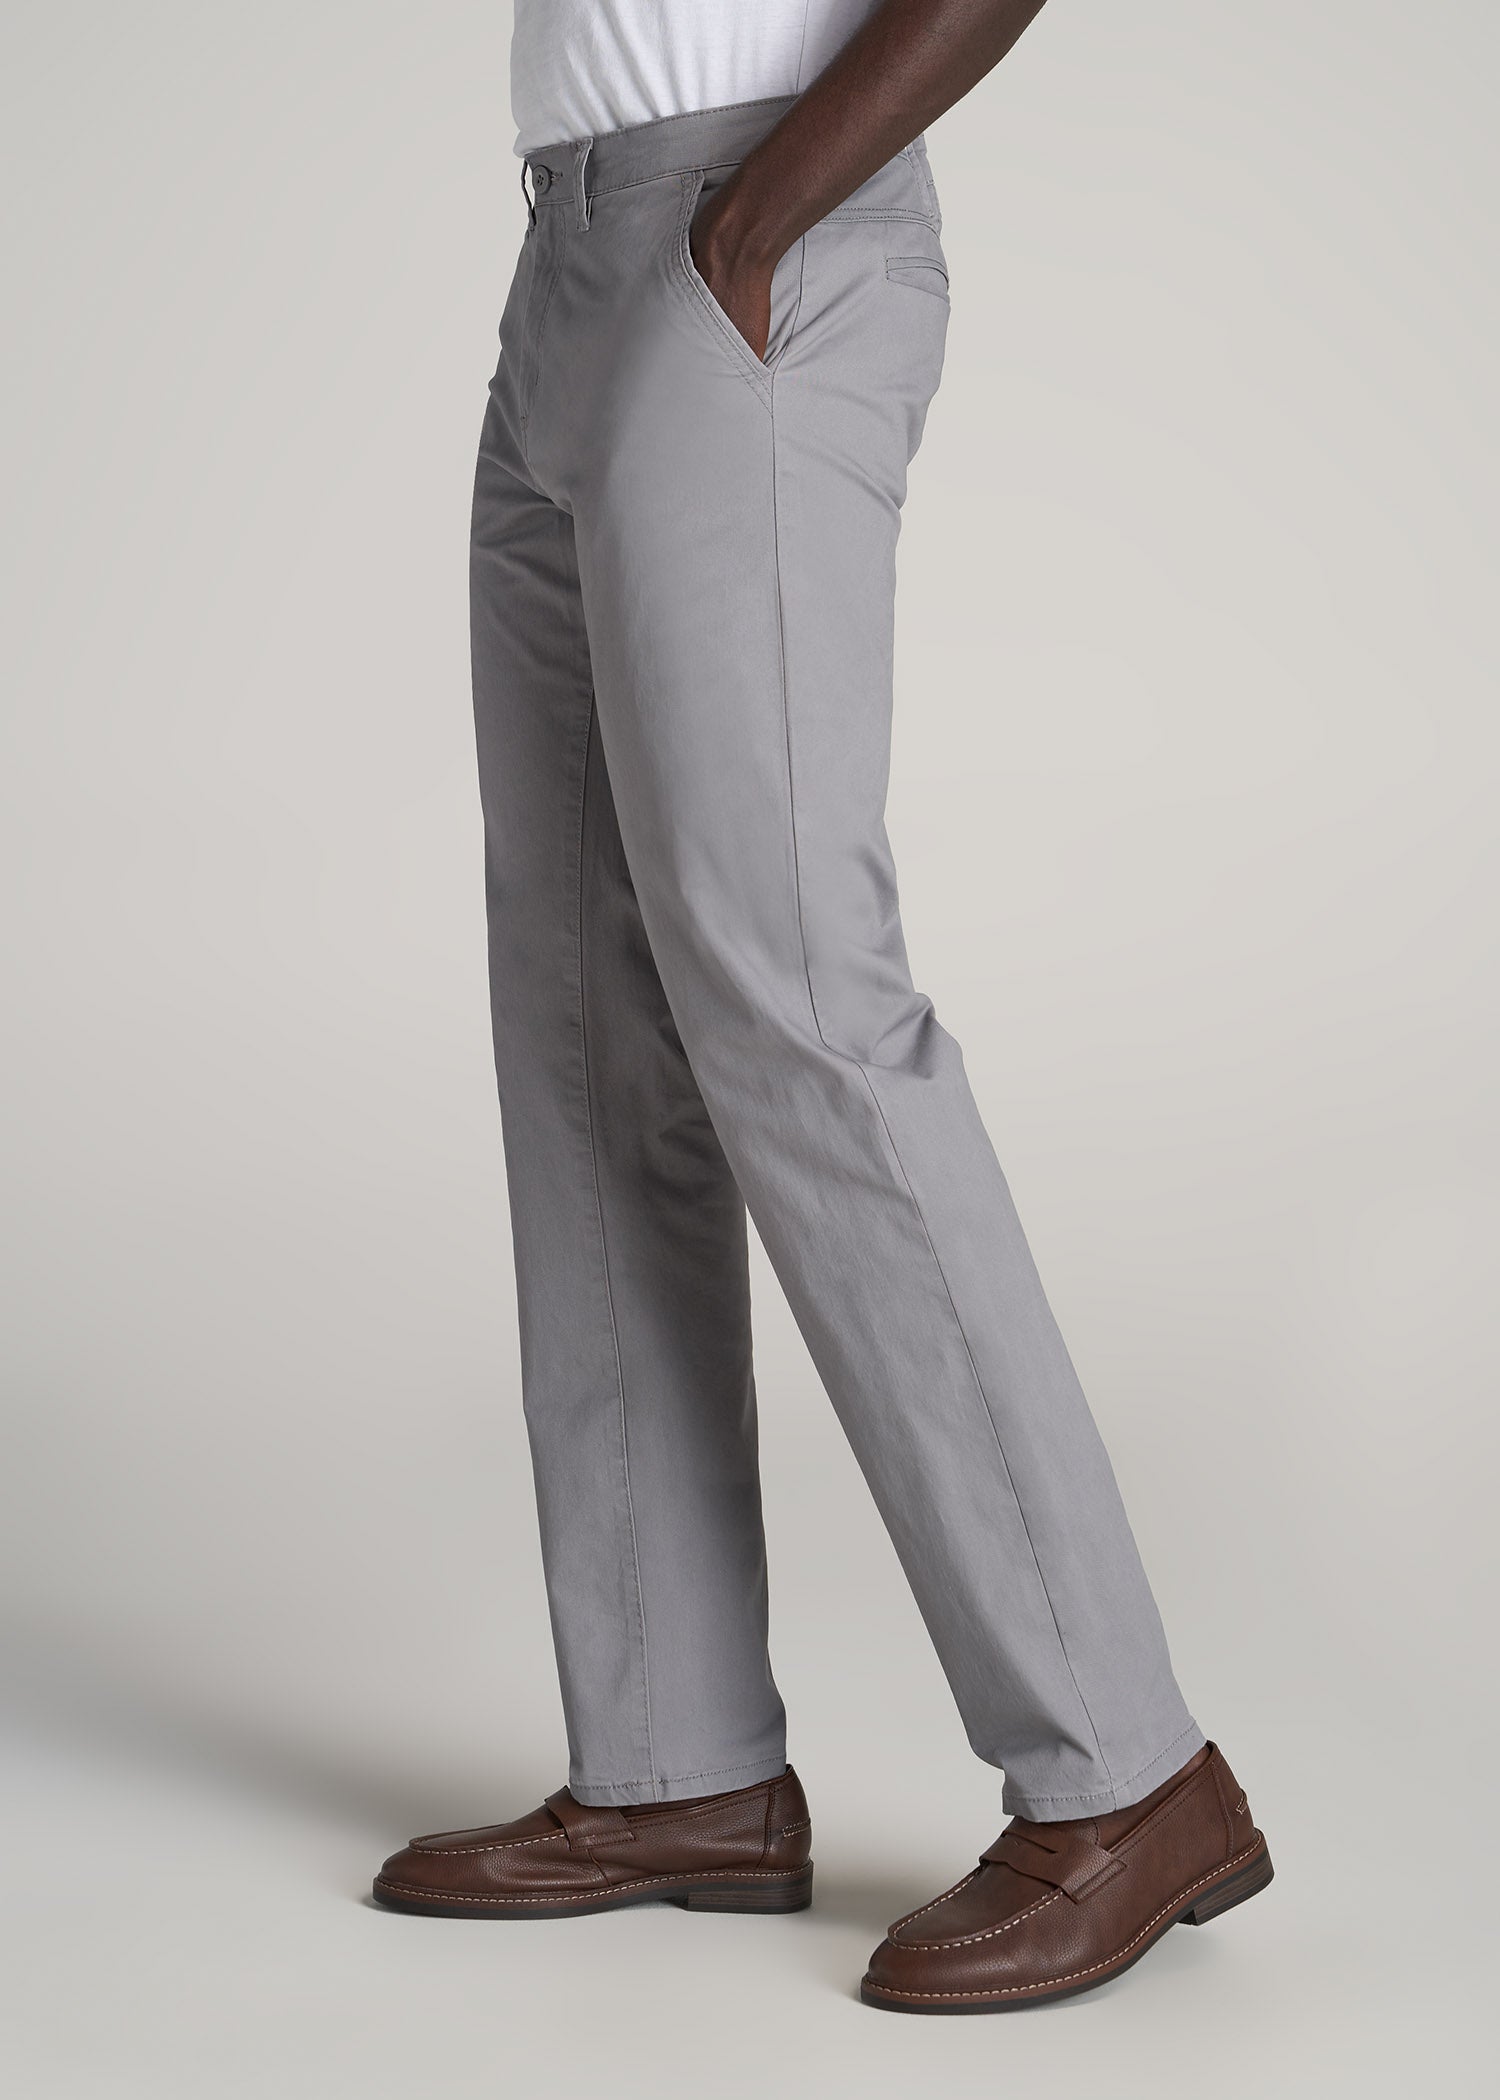 J1 STRAIGHT Leg Chinos in Pebble Grey - Pants for Tall Men